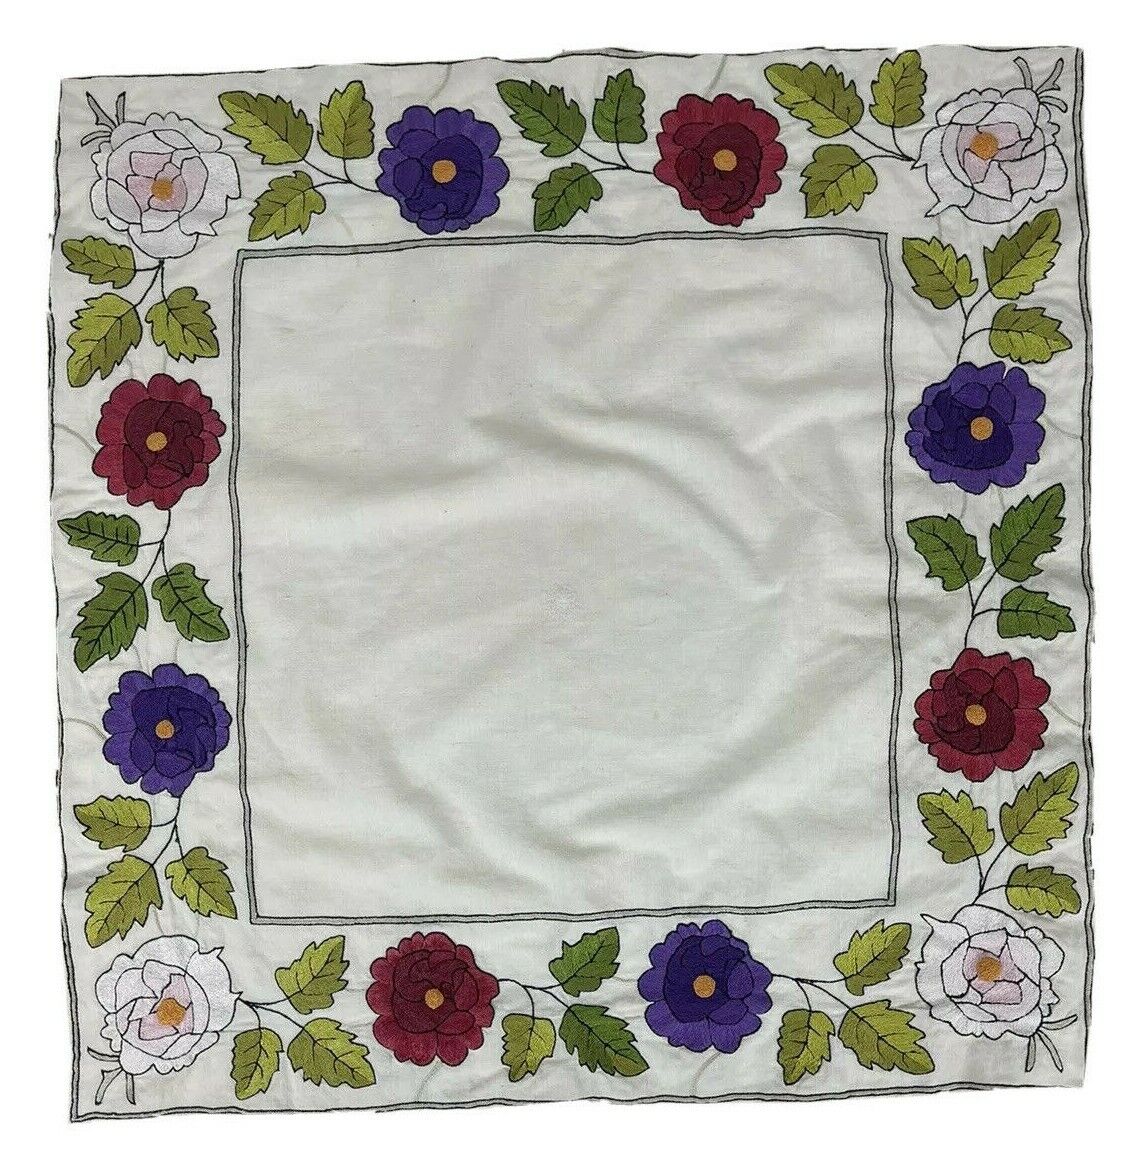 Vintage Linen Table Cover Multi Color Floral Hand Embroidered 27x27in.